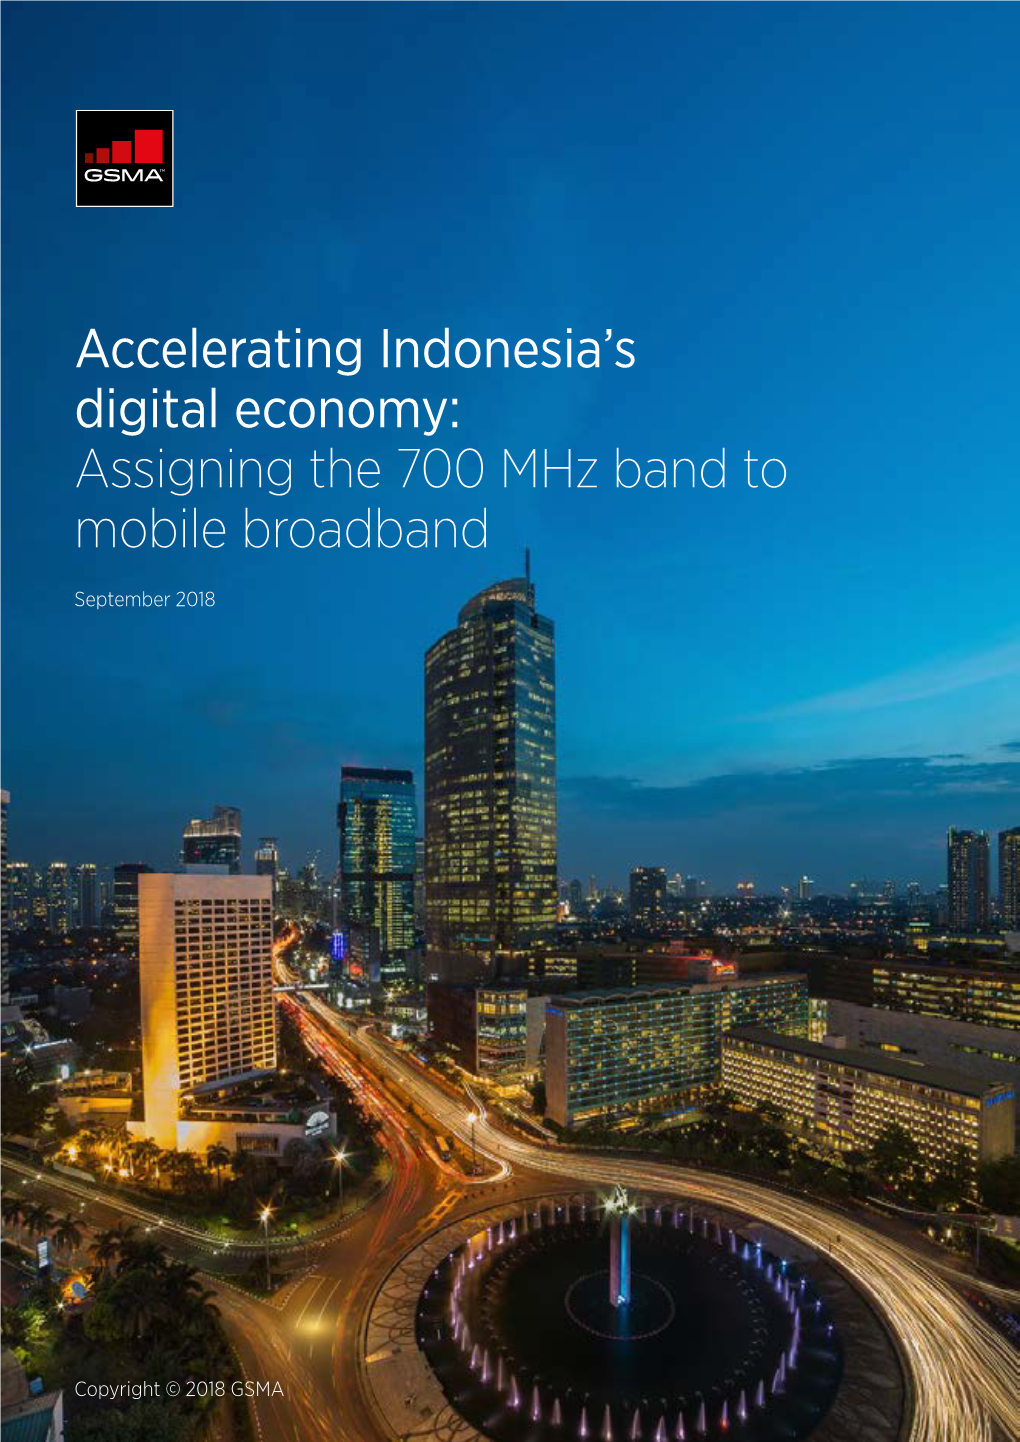 Accelerating Indonesia's Digital Economy: Assigning the 700 Mhz